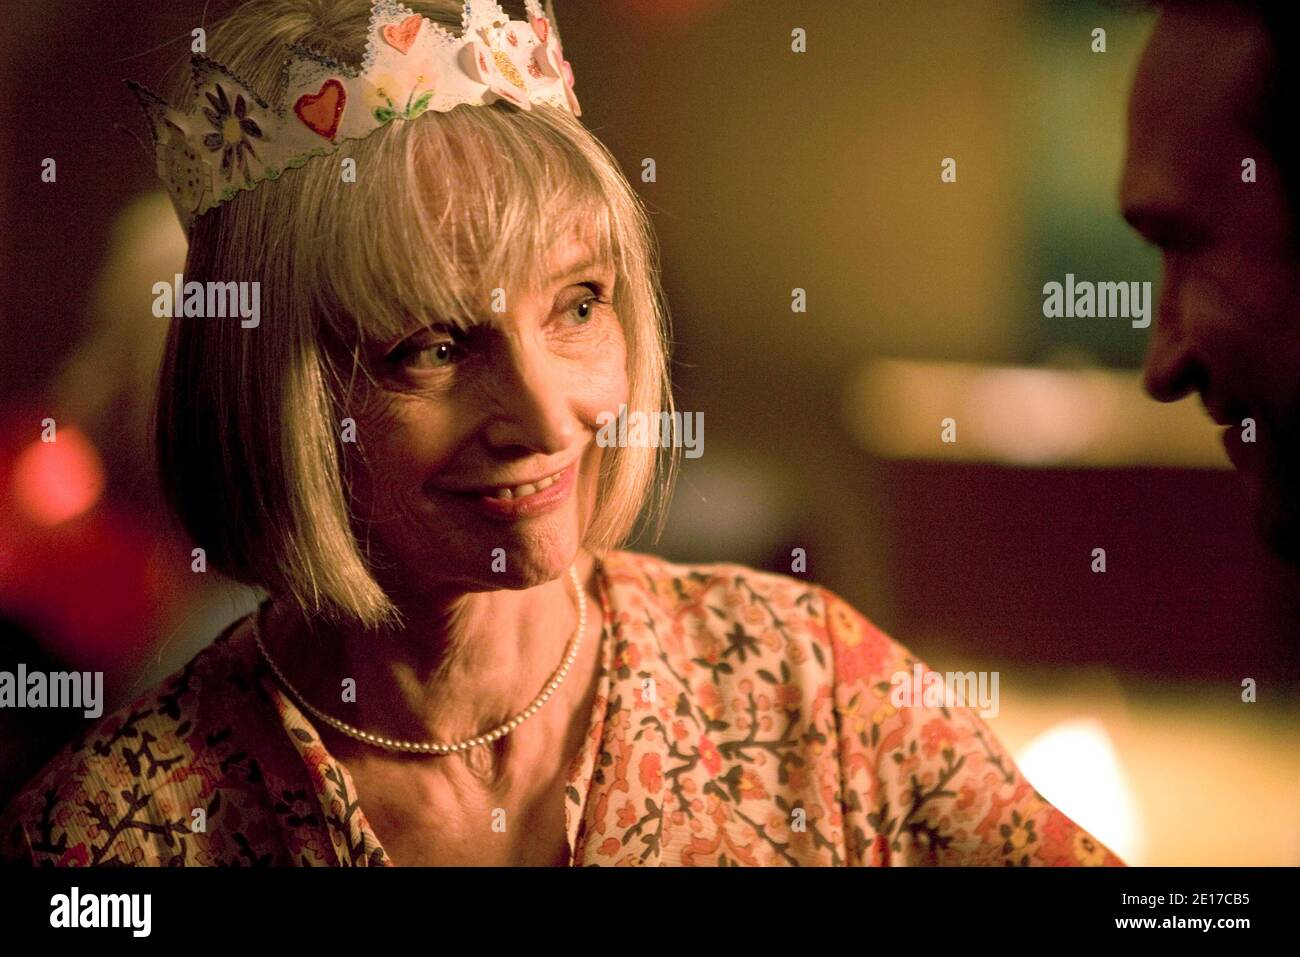 EXCLUSIVE. Edith Scob on the set of "Baiser Papillon", directed by Karine  Silla with Vincent Perez, Iman Perez and Roxanne Depardieu, France, 2010.  Photo by Jean-Marie Marion/ABACAPRESS.COM Stock Photo - Alamy